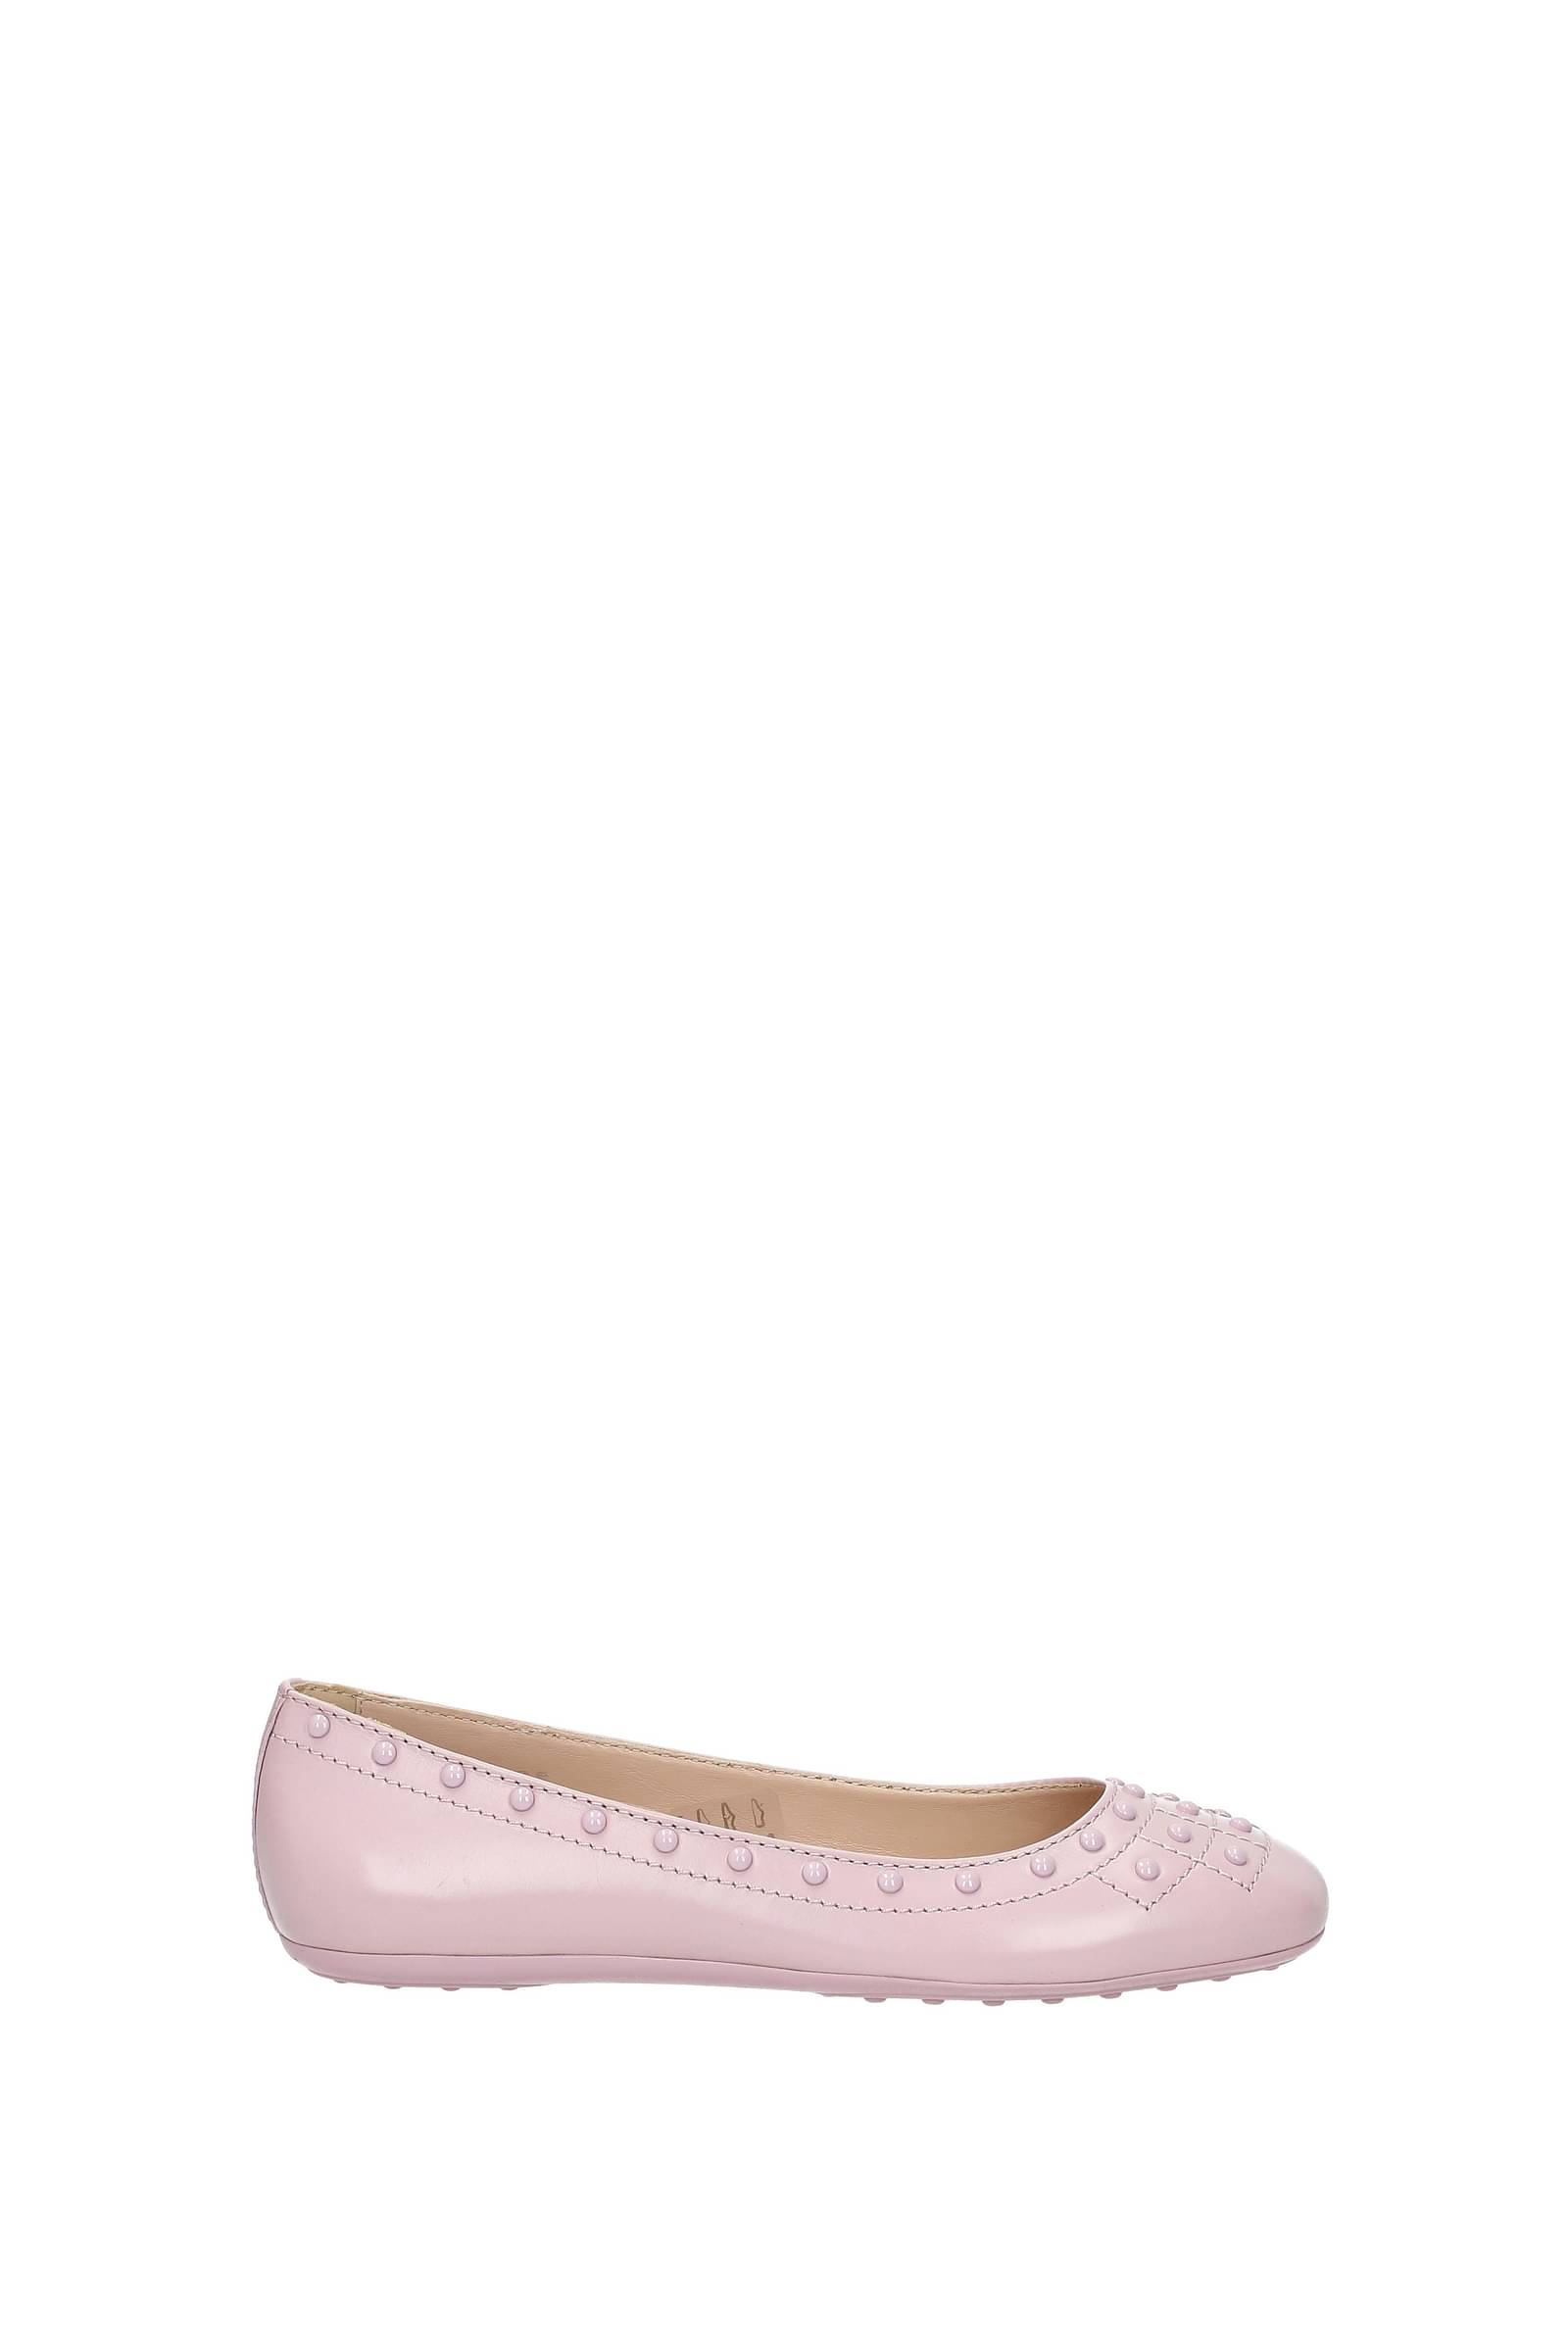 Pretty Ballerinas Leather Ballet Flats in Light Pink Womens Shoes Flats and flat shoes Ballet flats and ballerina shoes Pink 